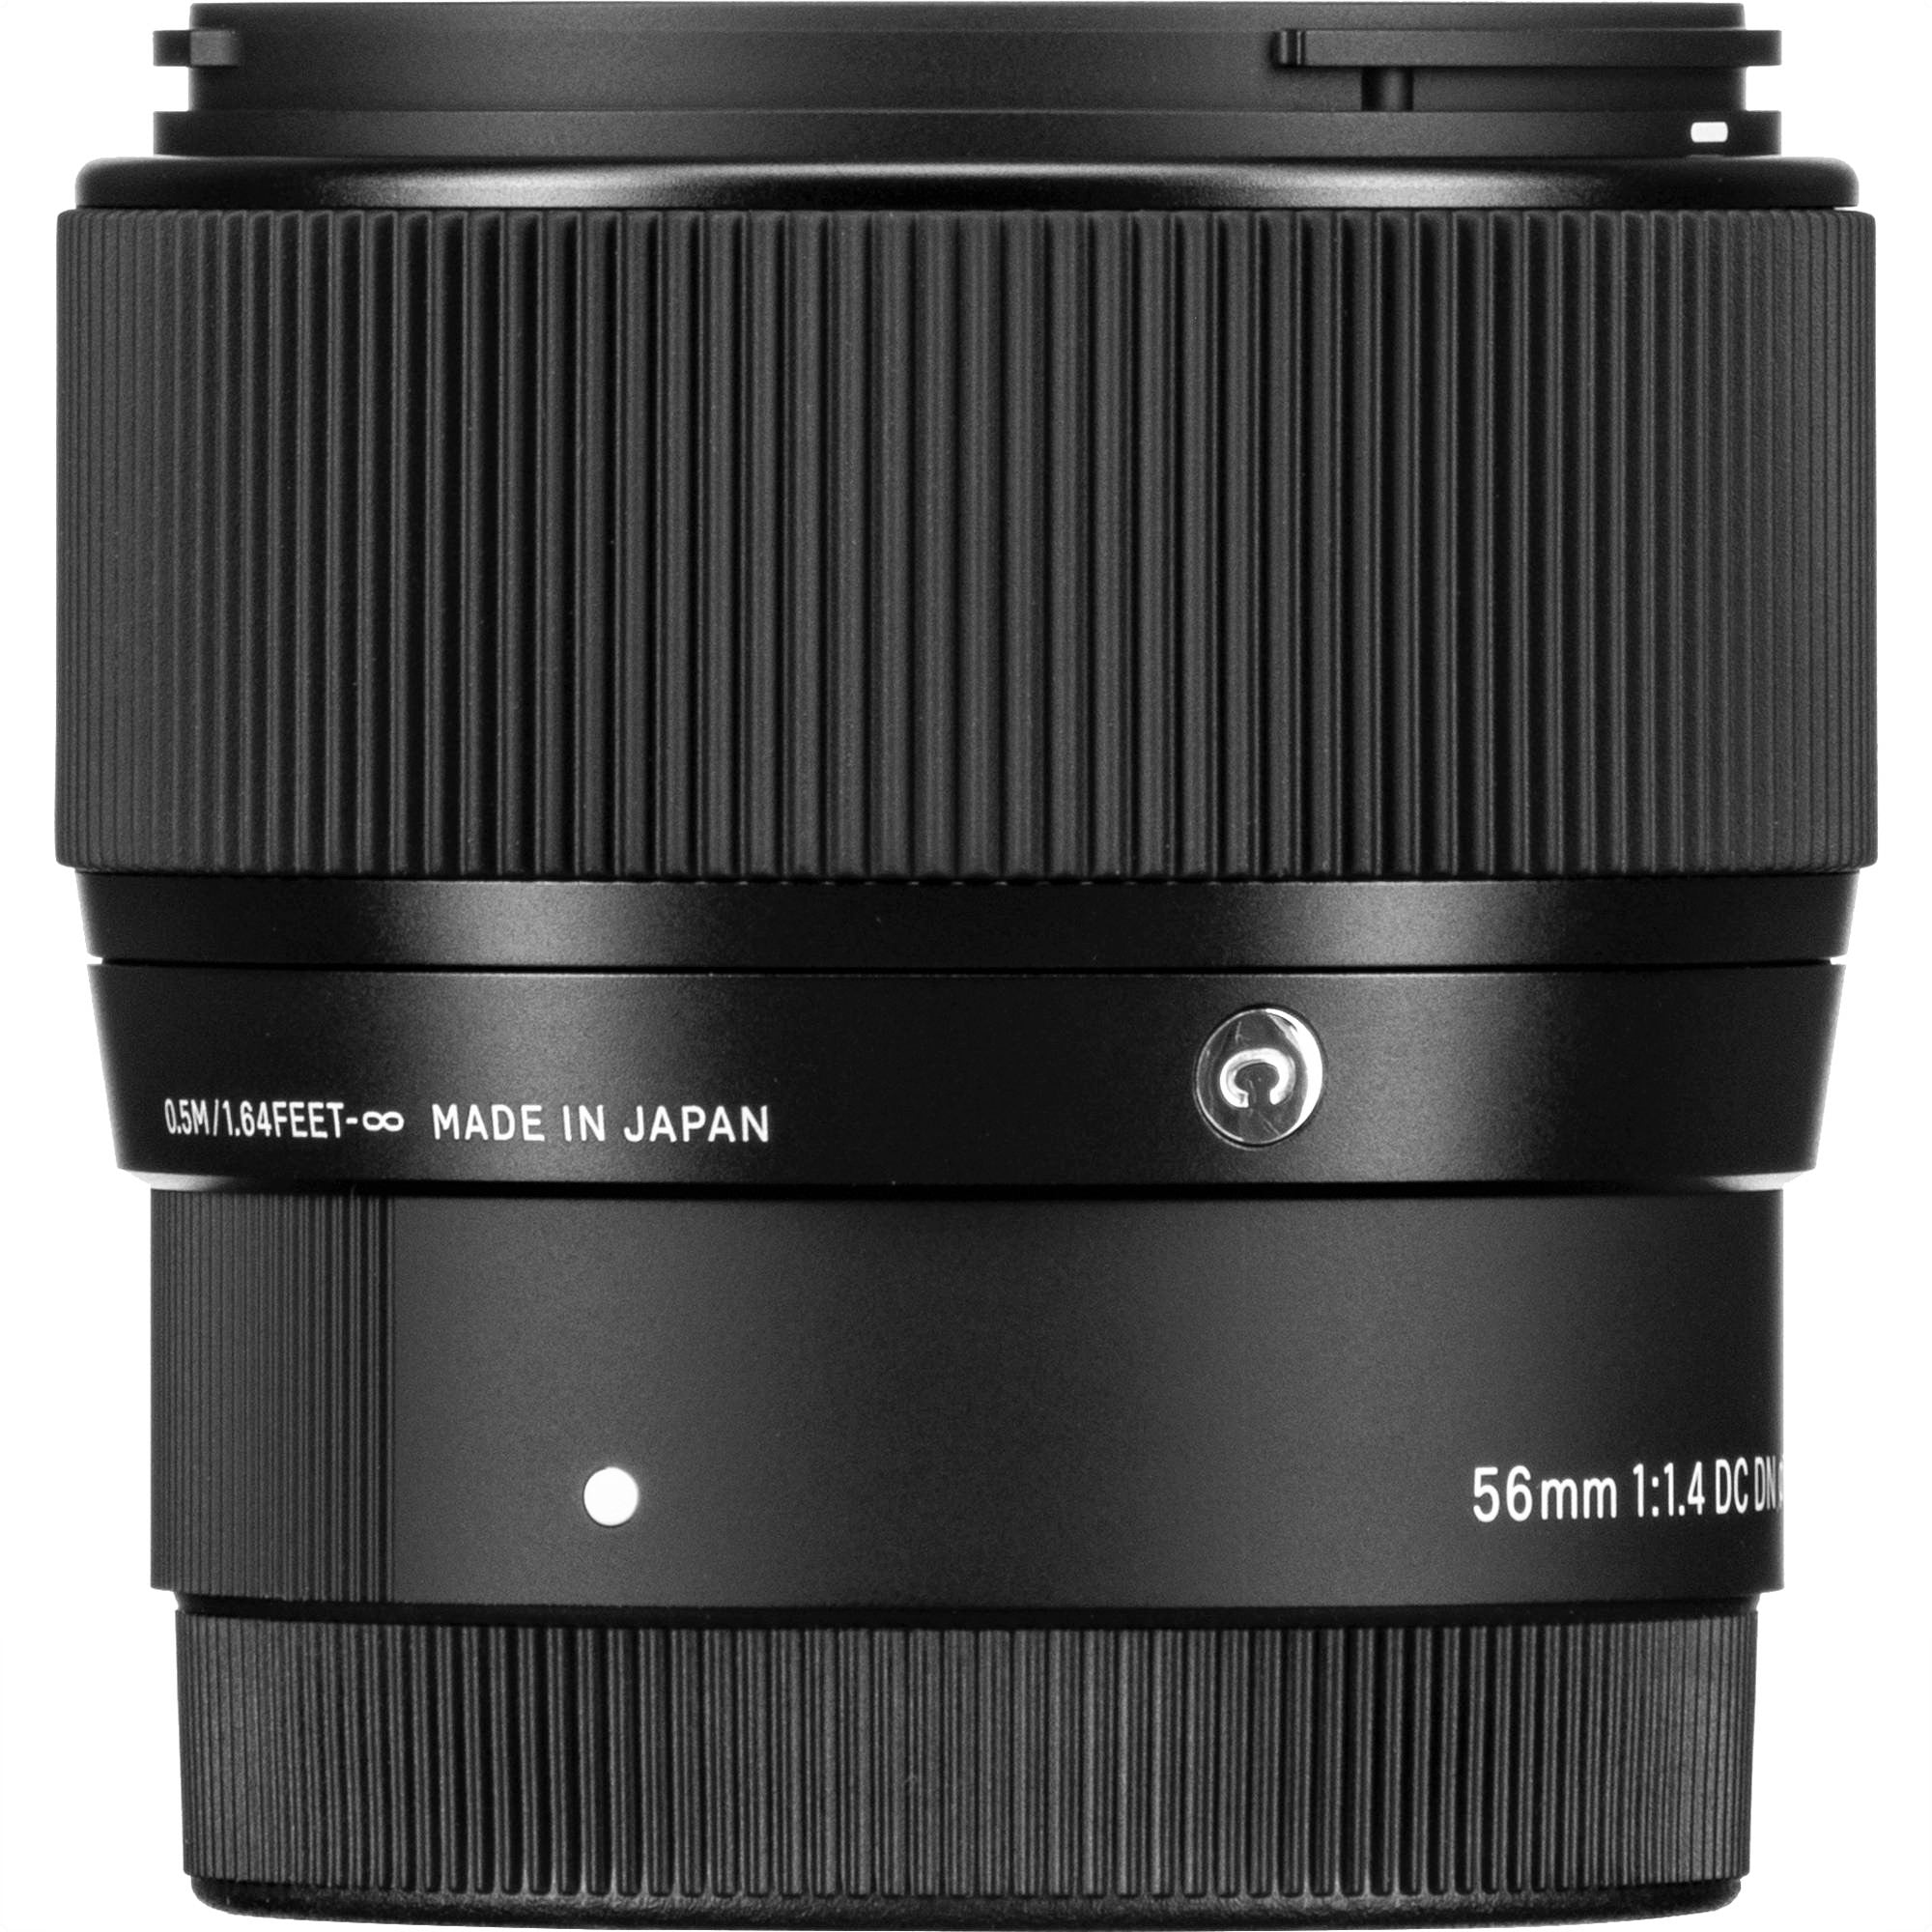 Sigma 56mm f/1.4 Contemporary DC DN Lens for Fuji X Mount